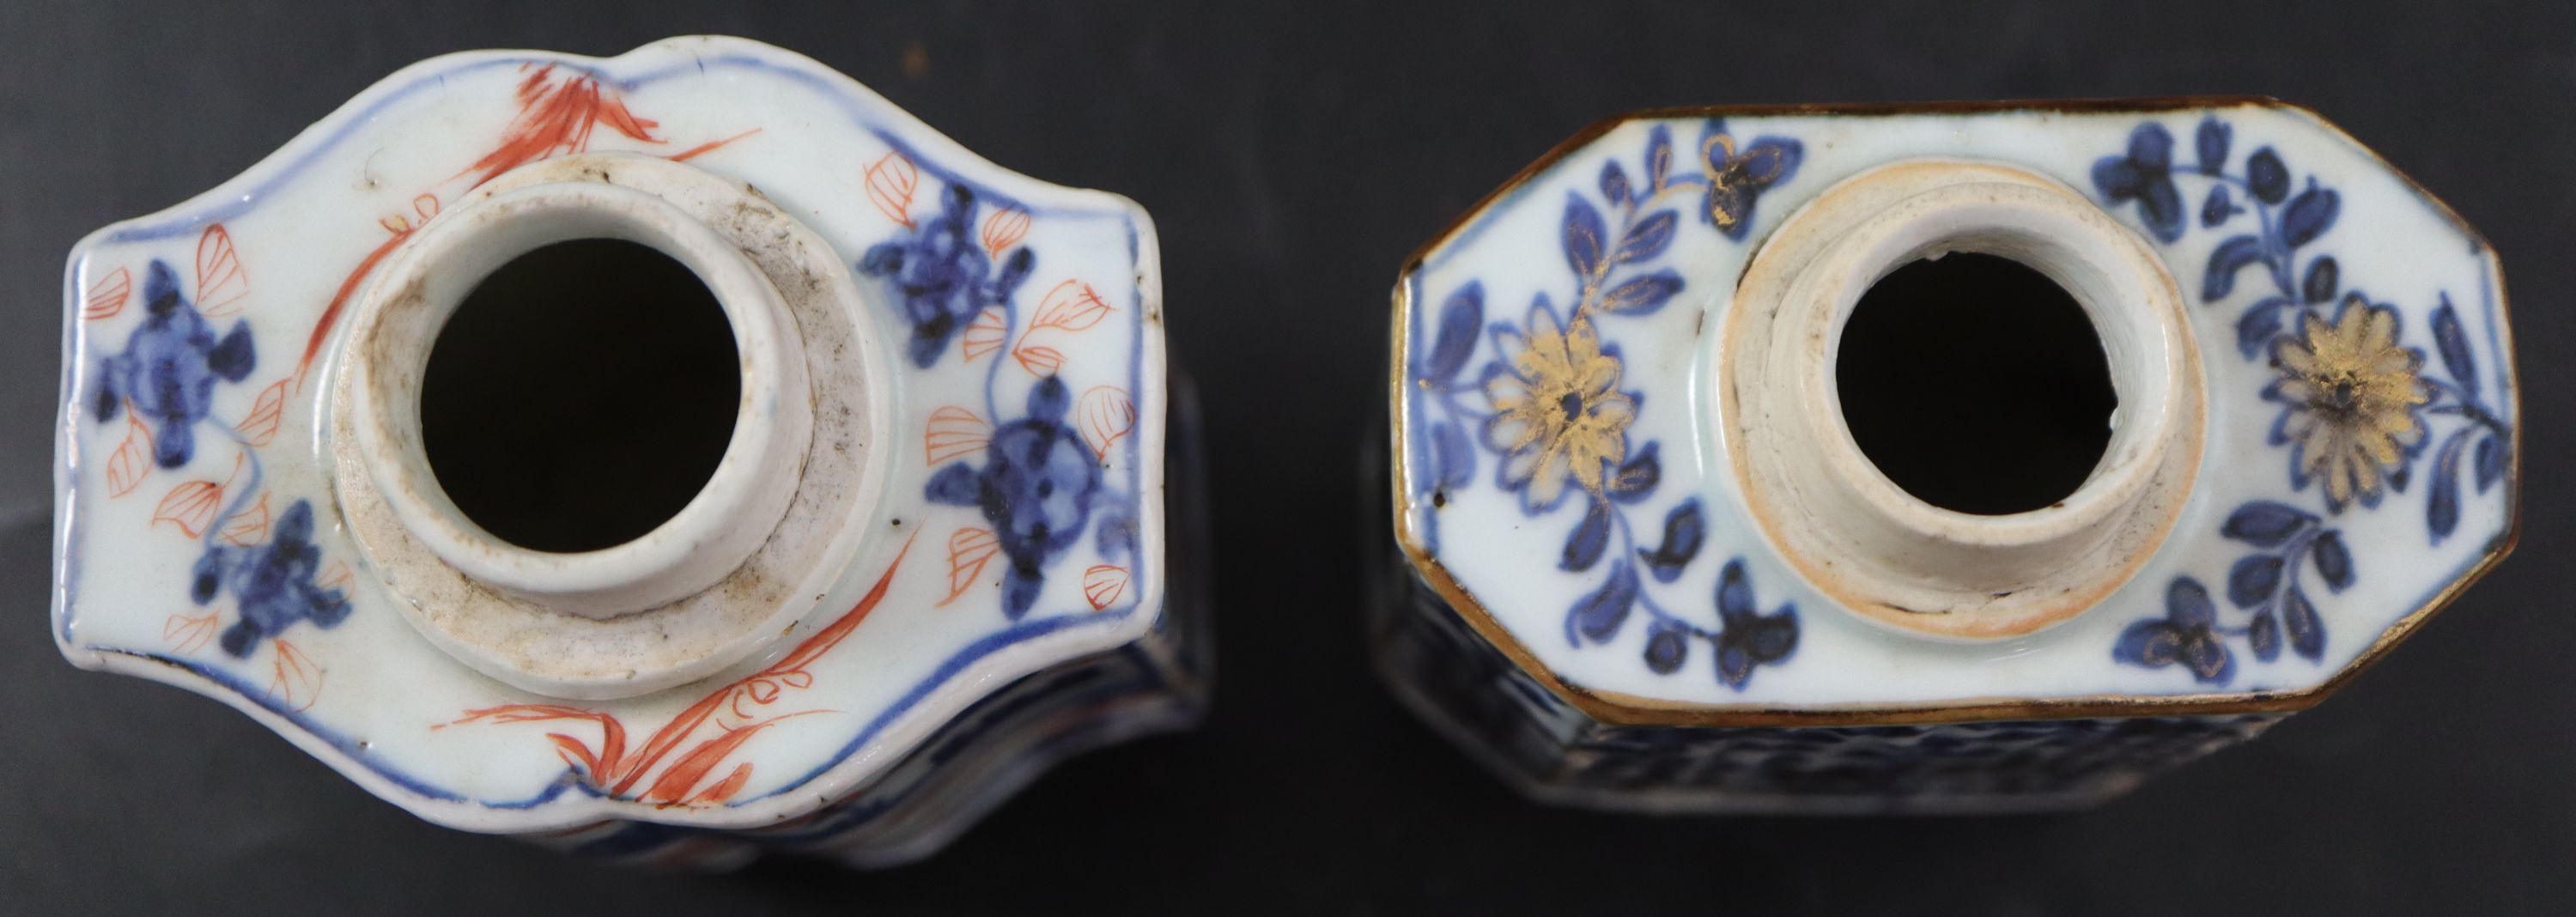 Two 18th century Chinese porcelain tea caddies, a cup and a Ming enamelled bronze lid